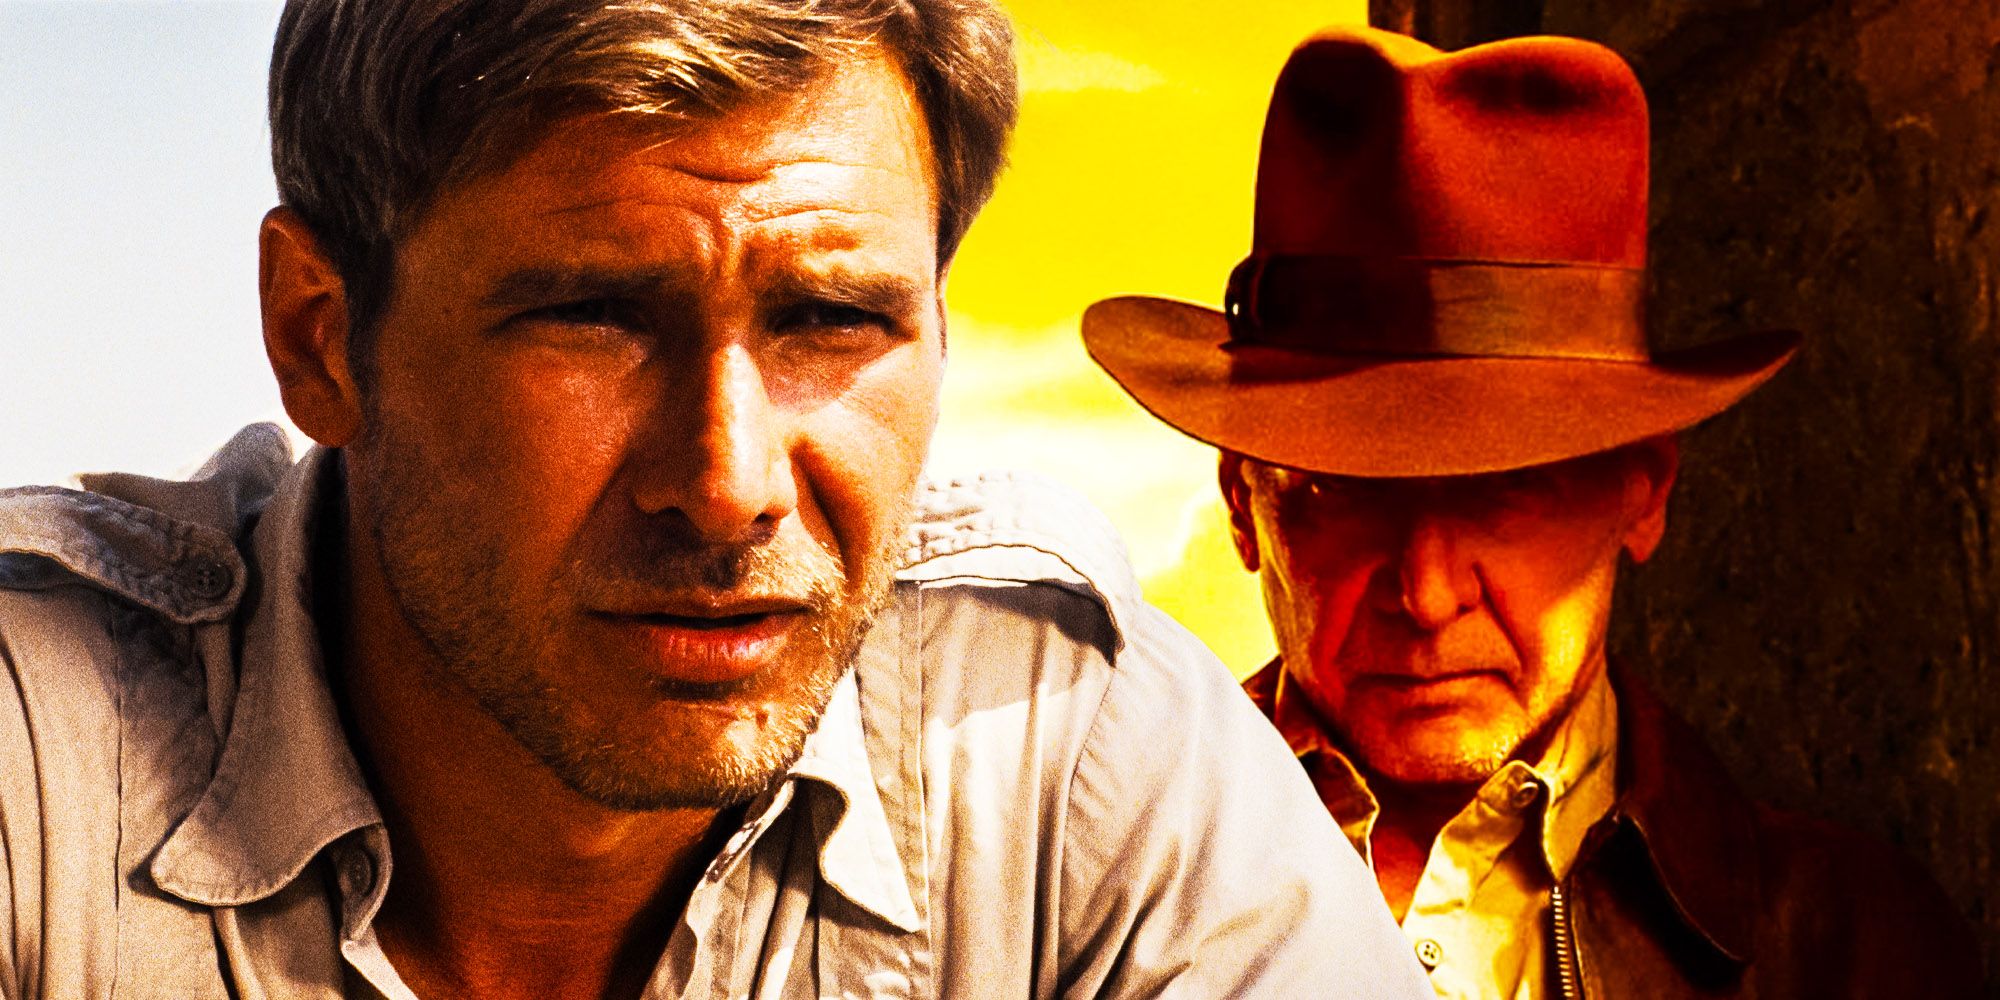 Harrison ford indiana jones, destroyers from the lost ship indian jones 5